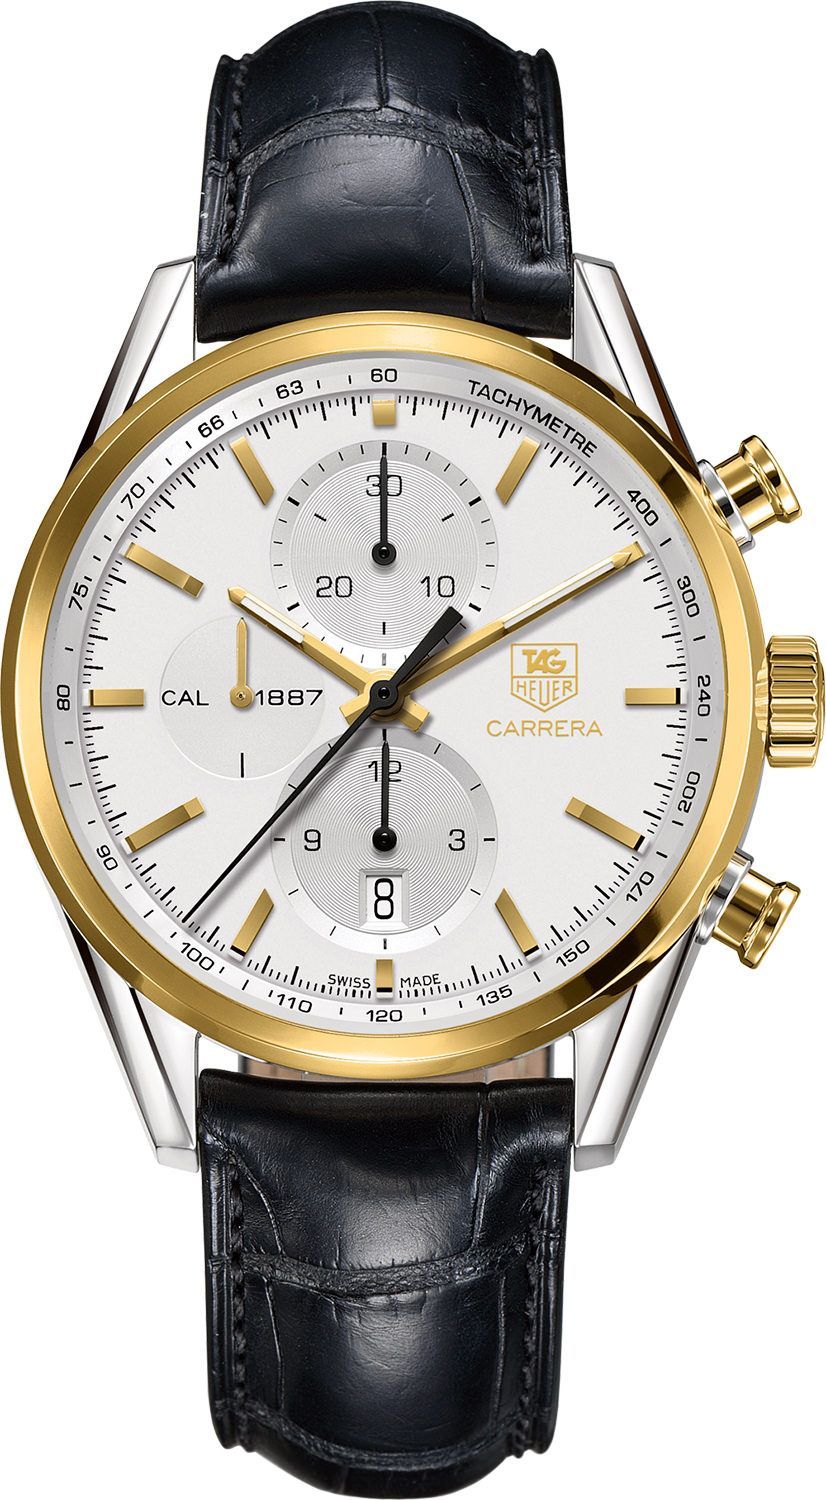 TAG Heuer Carrera Calibre 1887 White Dial 41 mm Automatic Watch For Men - 1